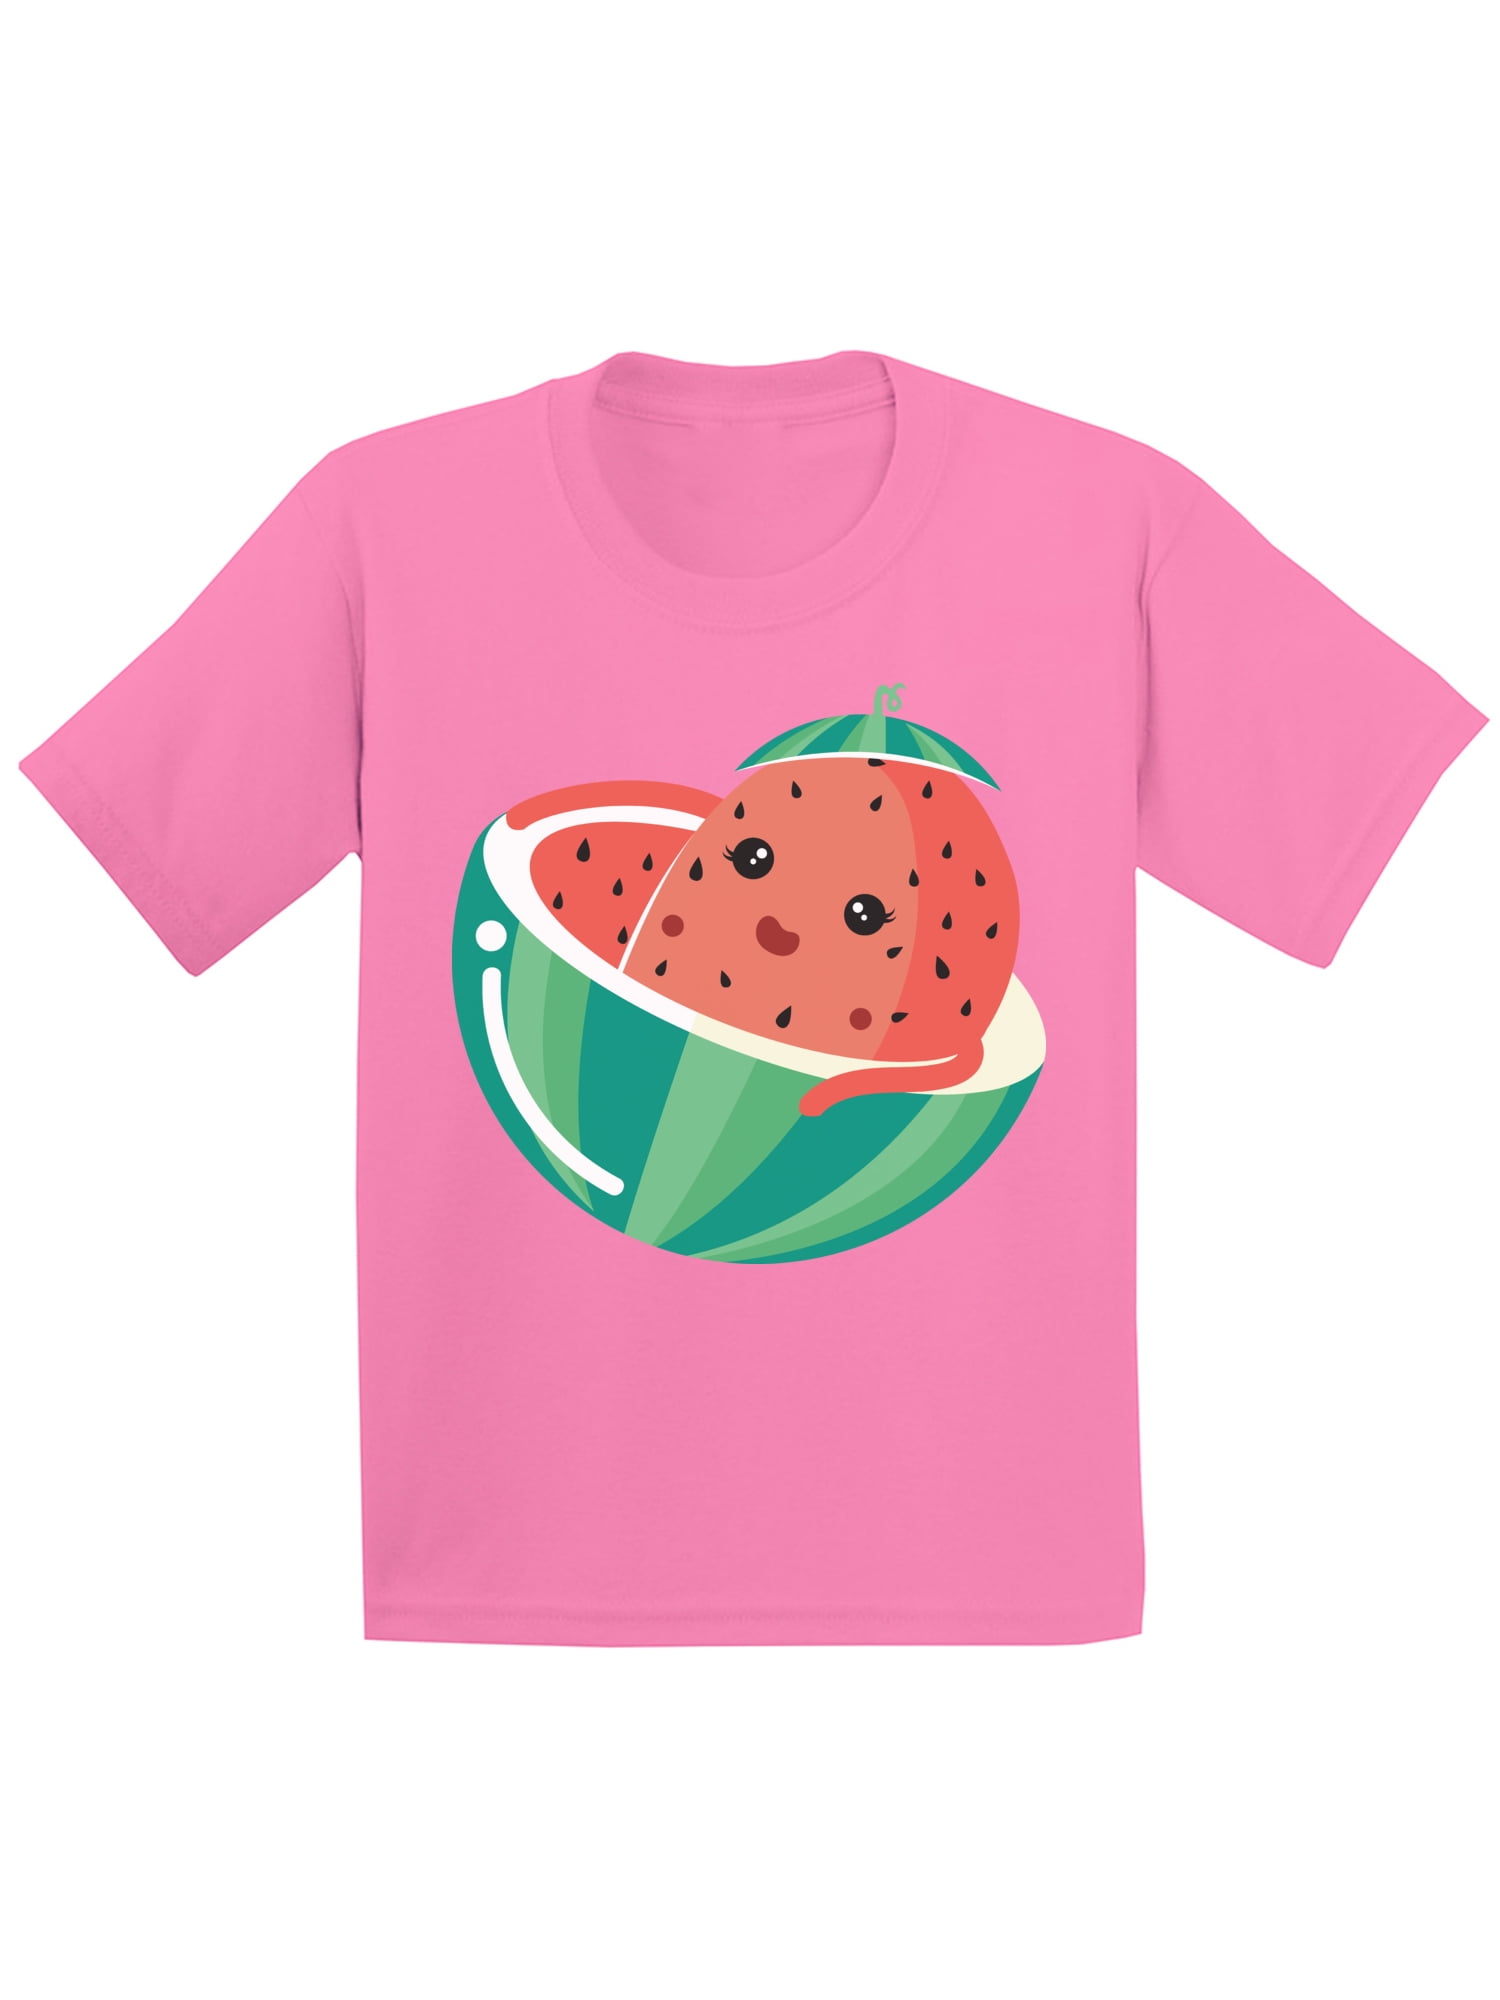 Awkward Styles Watermelon Youth T Shirt for Girls Shirts for Boys Watermelon Kids Watermelon Outfit Fruits Shirts T-Shirt for Children Items Cute Fruits Tshirt Berry Lovers Clothing -